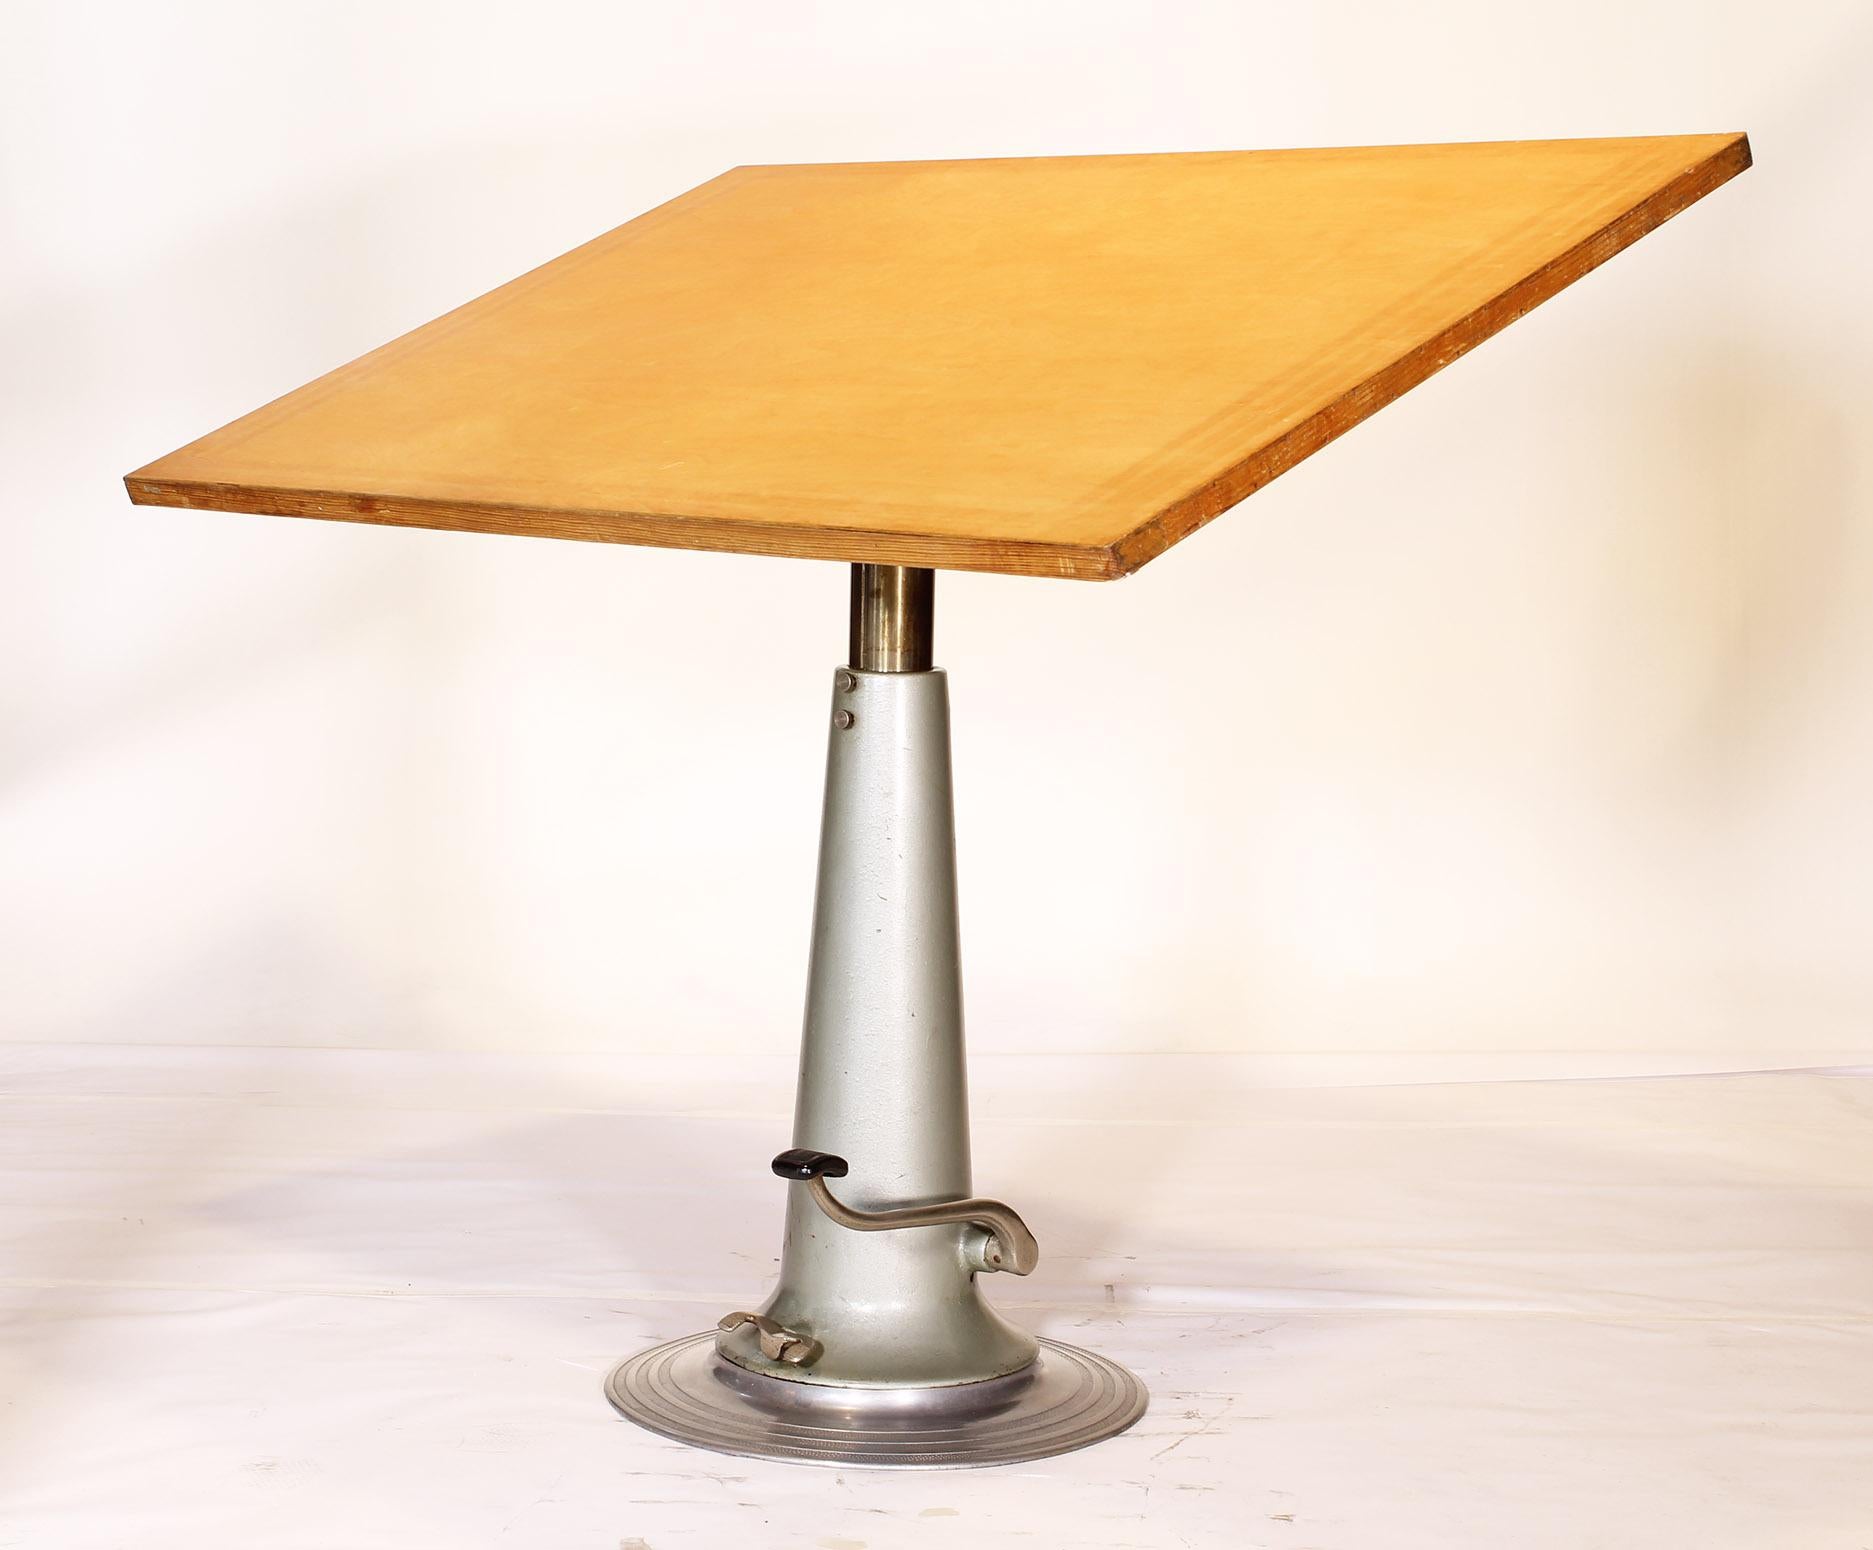 Authentic vintage industrial style swivel, tilt and height adjustable drafting table or desk by Nike. Made in Sweden, 1940-1950s, this is the tall version that will adjust from 38 3/4